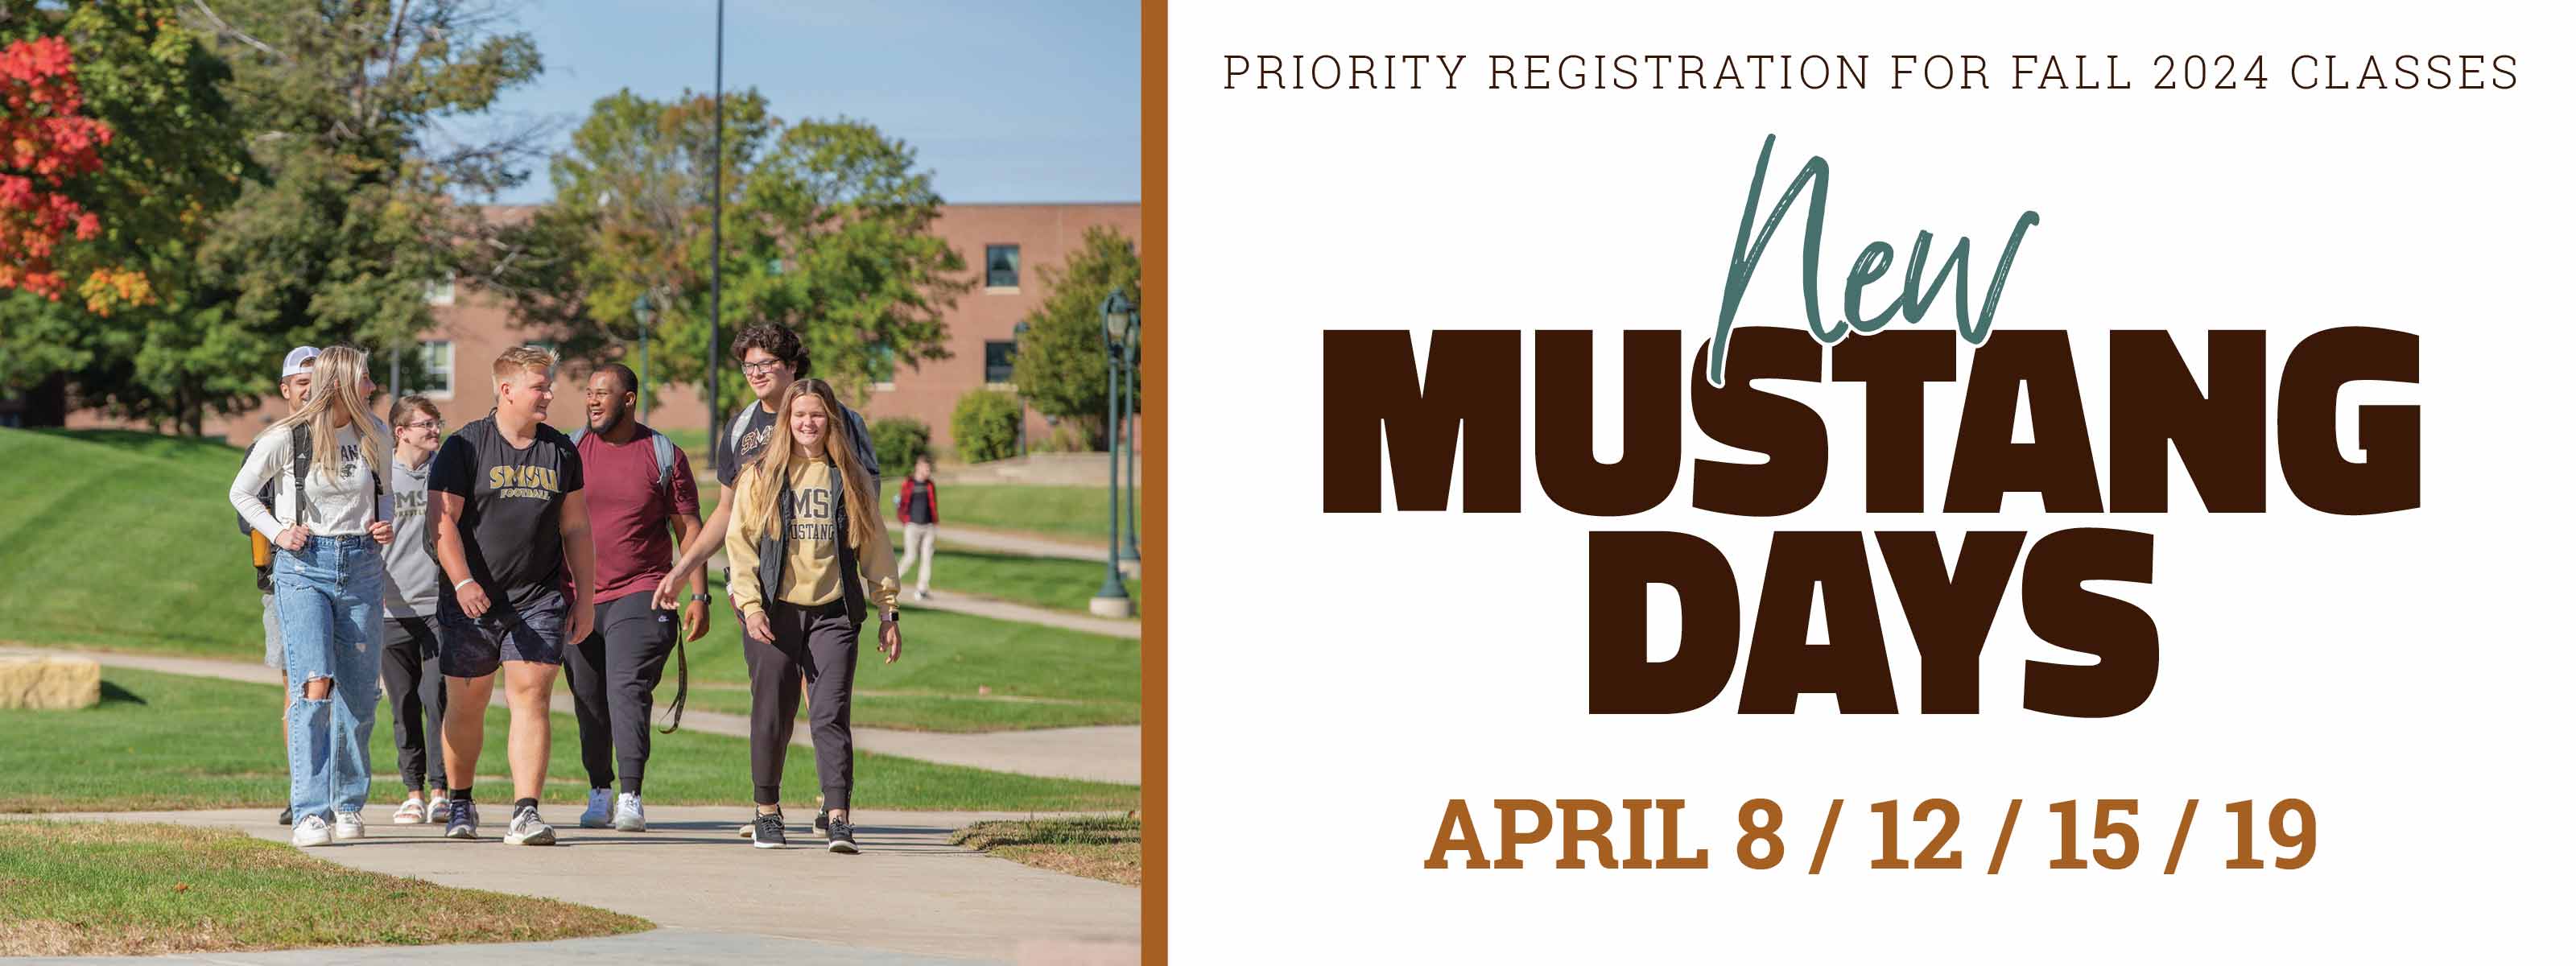 Priority Registration for Fall 2024 Classes - New Mustang Days - April 8, 12, 15, 19 - Click for more information